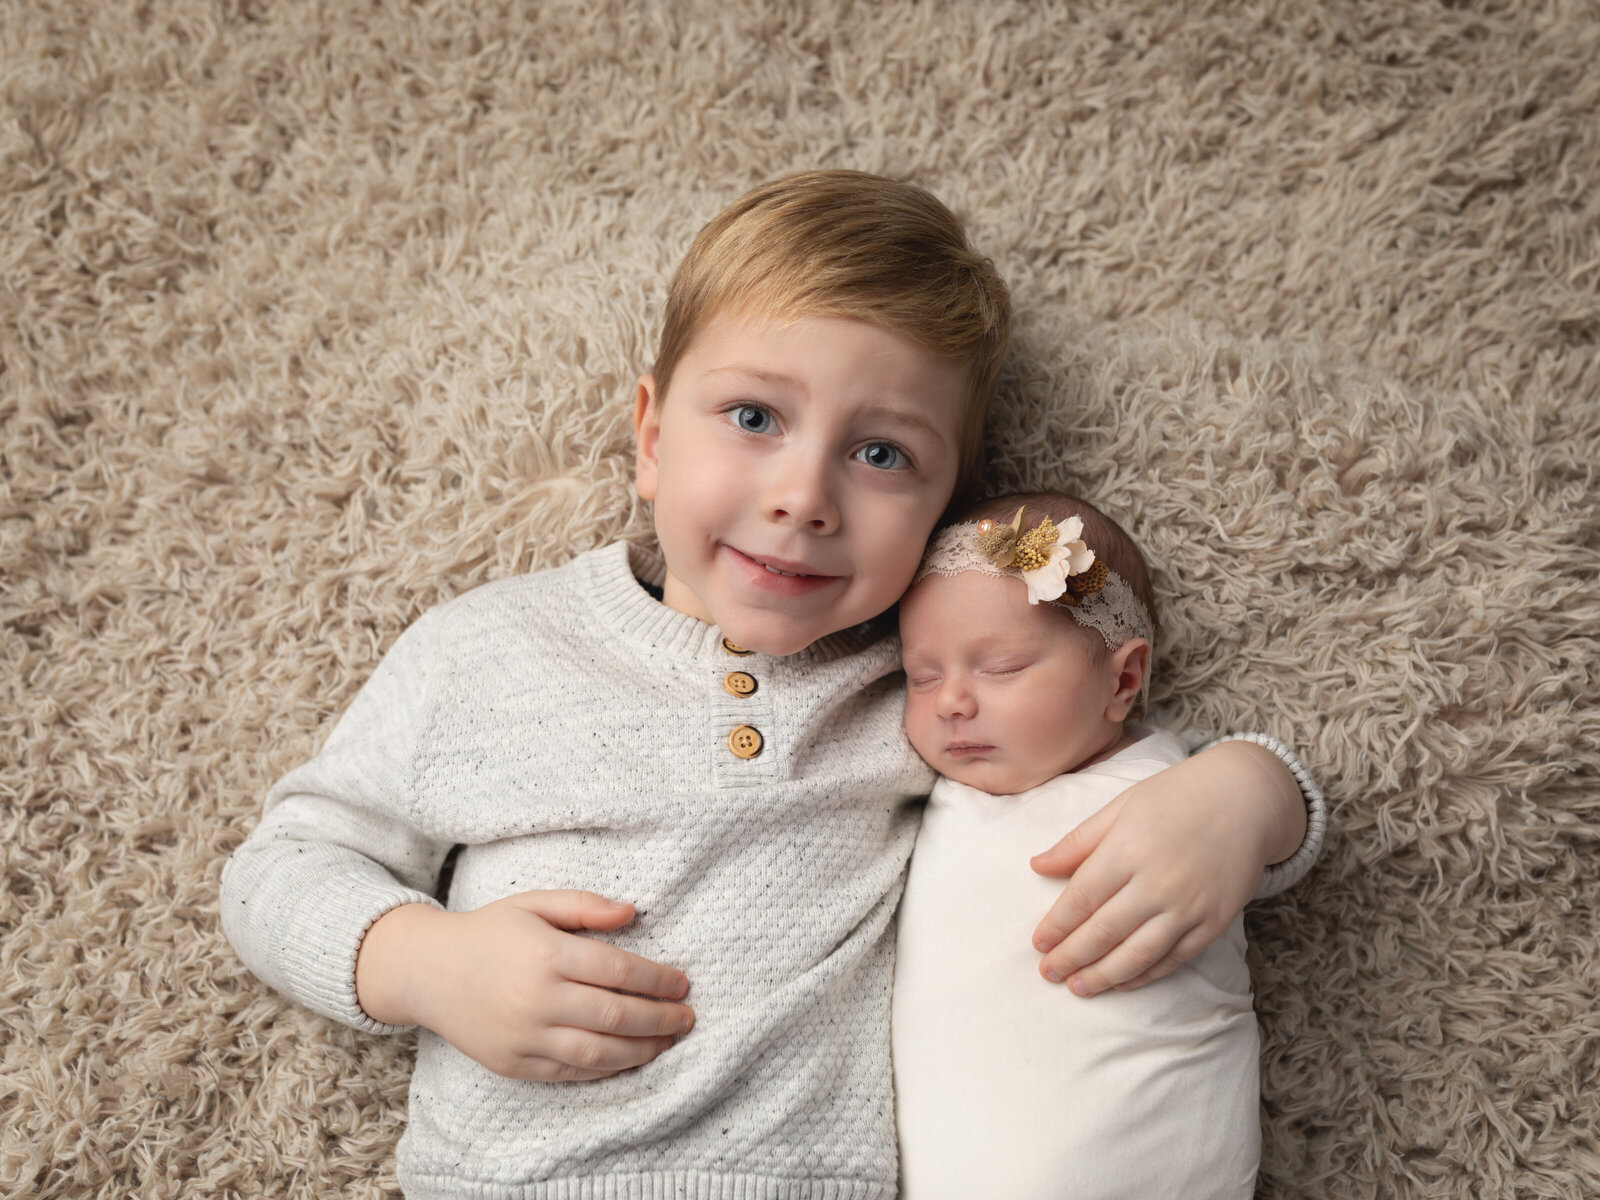 brother holding baby sister for photoshoot